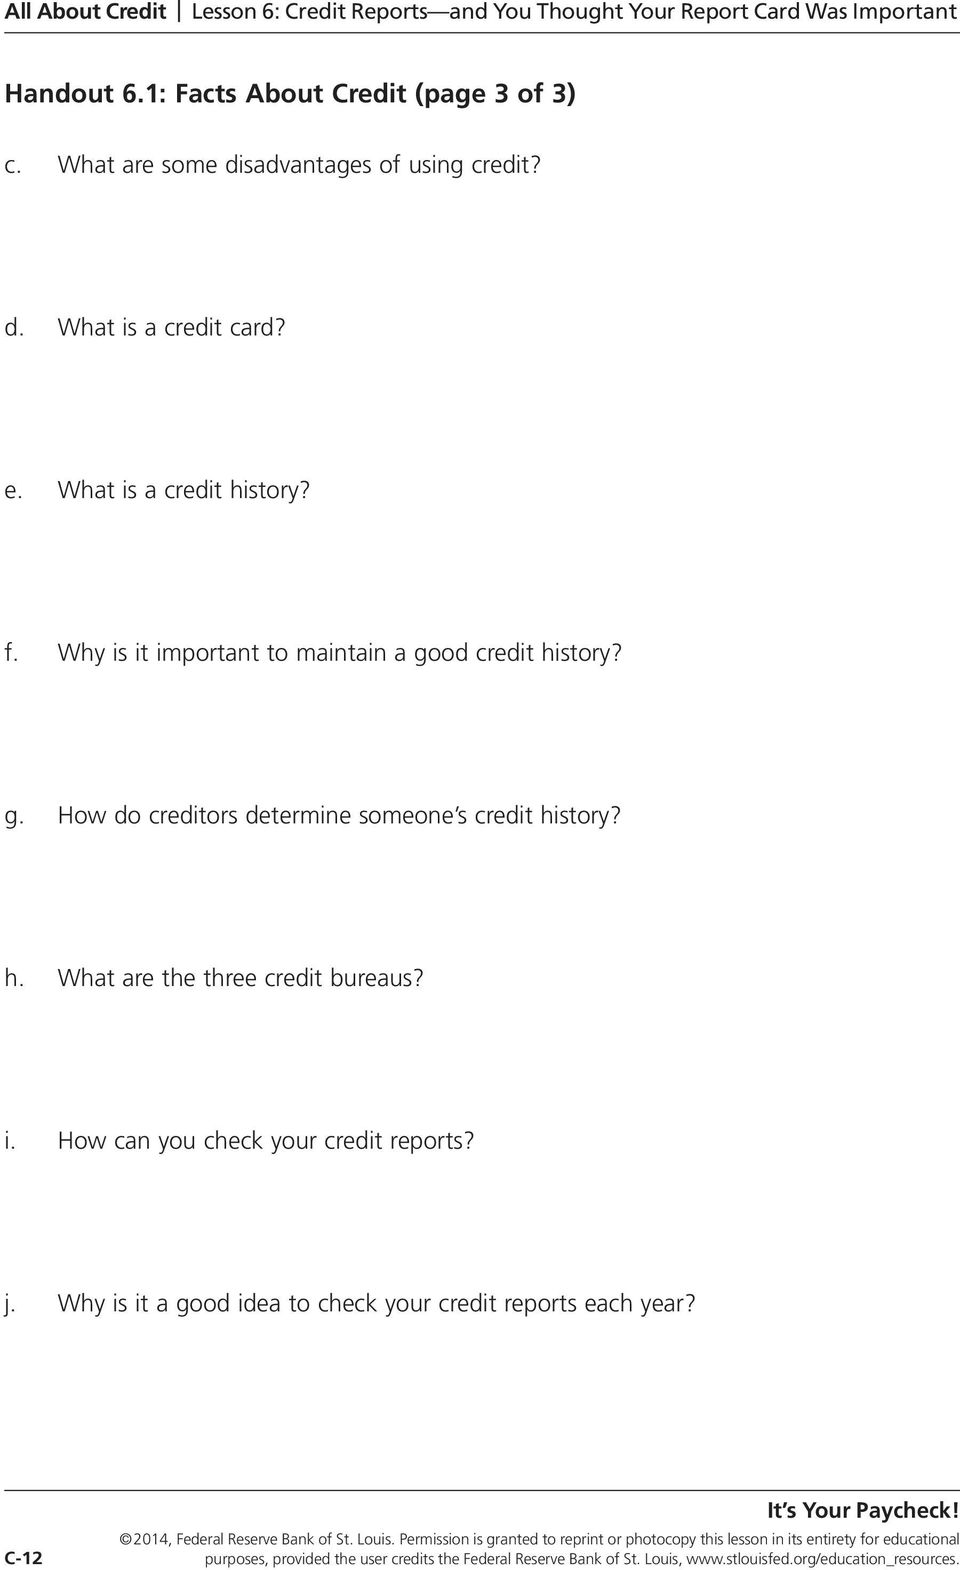 j. Why is it a good idea to check your credit reports each year? 2014, Federal Reserve Bank of St. Louis.